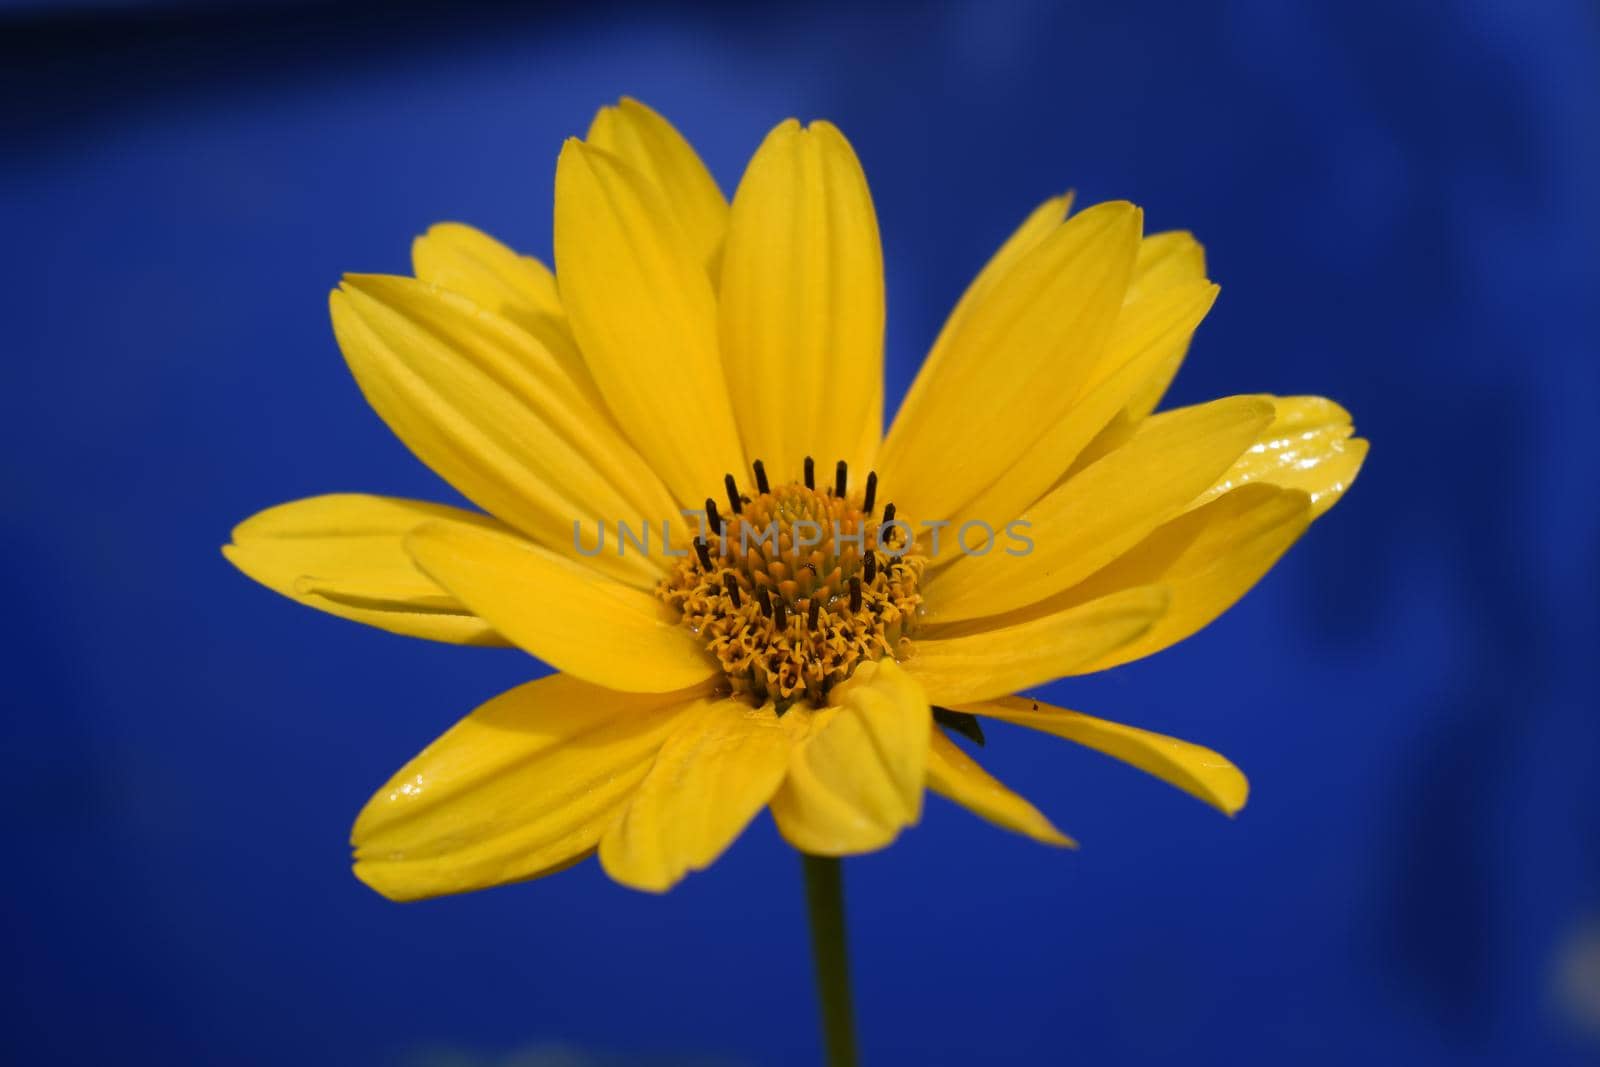 Yellow daisy flower (heliopsis) on the deep blue background.